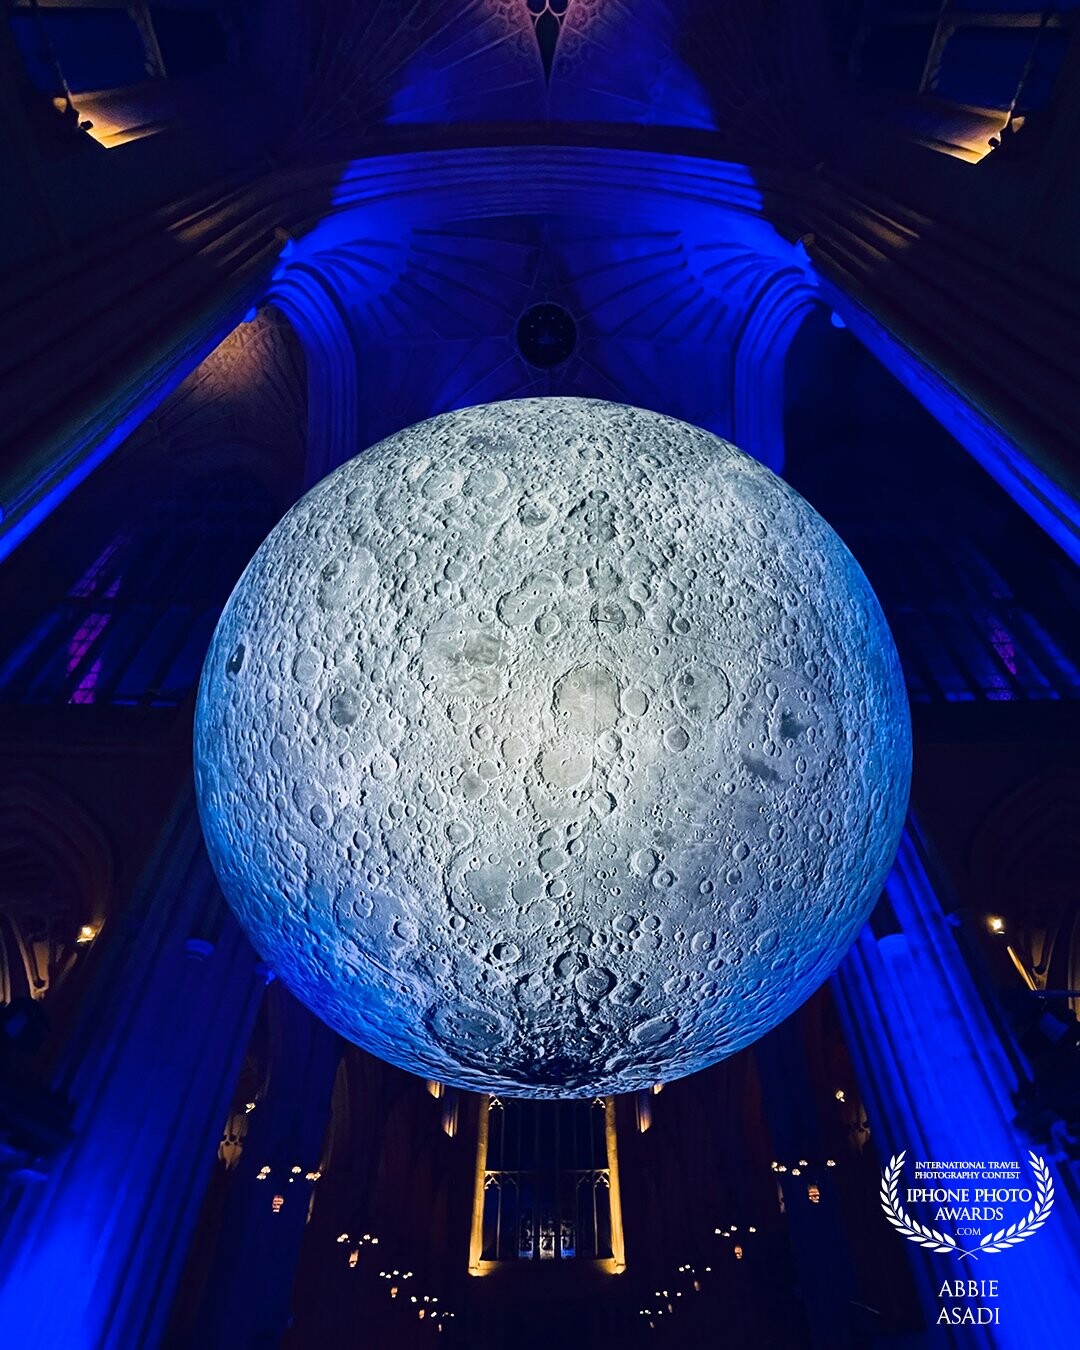 The Moon. <br />
<br />
A beautiful immersive display in Bath Abbey getting up close with the Moon. A wonderful way to learn with my children about all it’s magic.